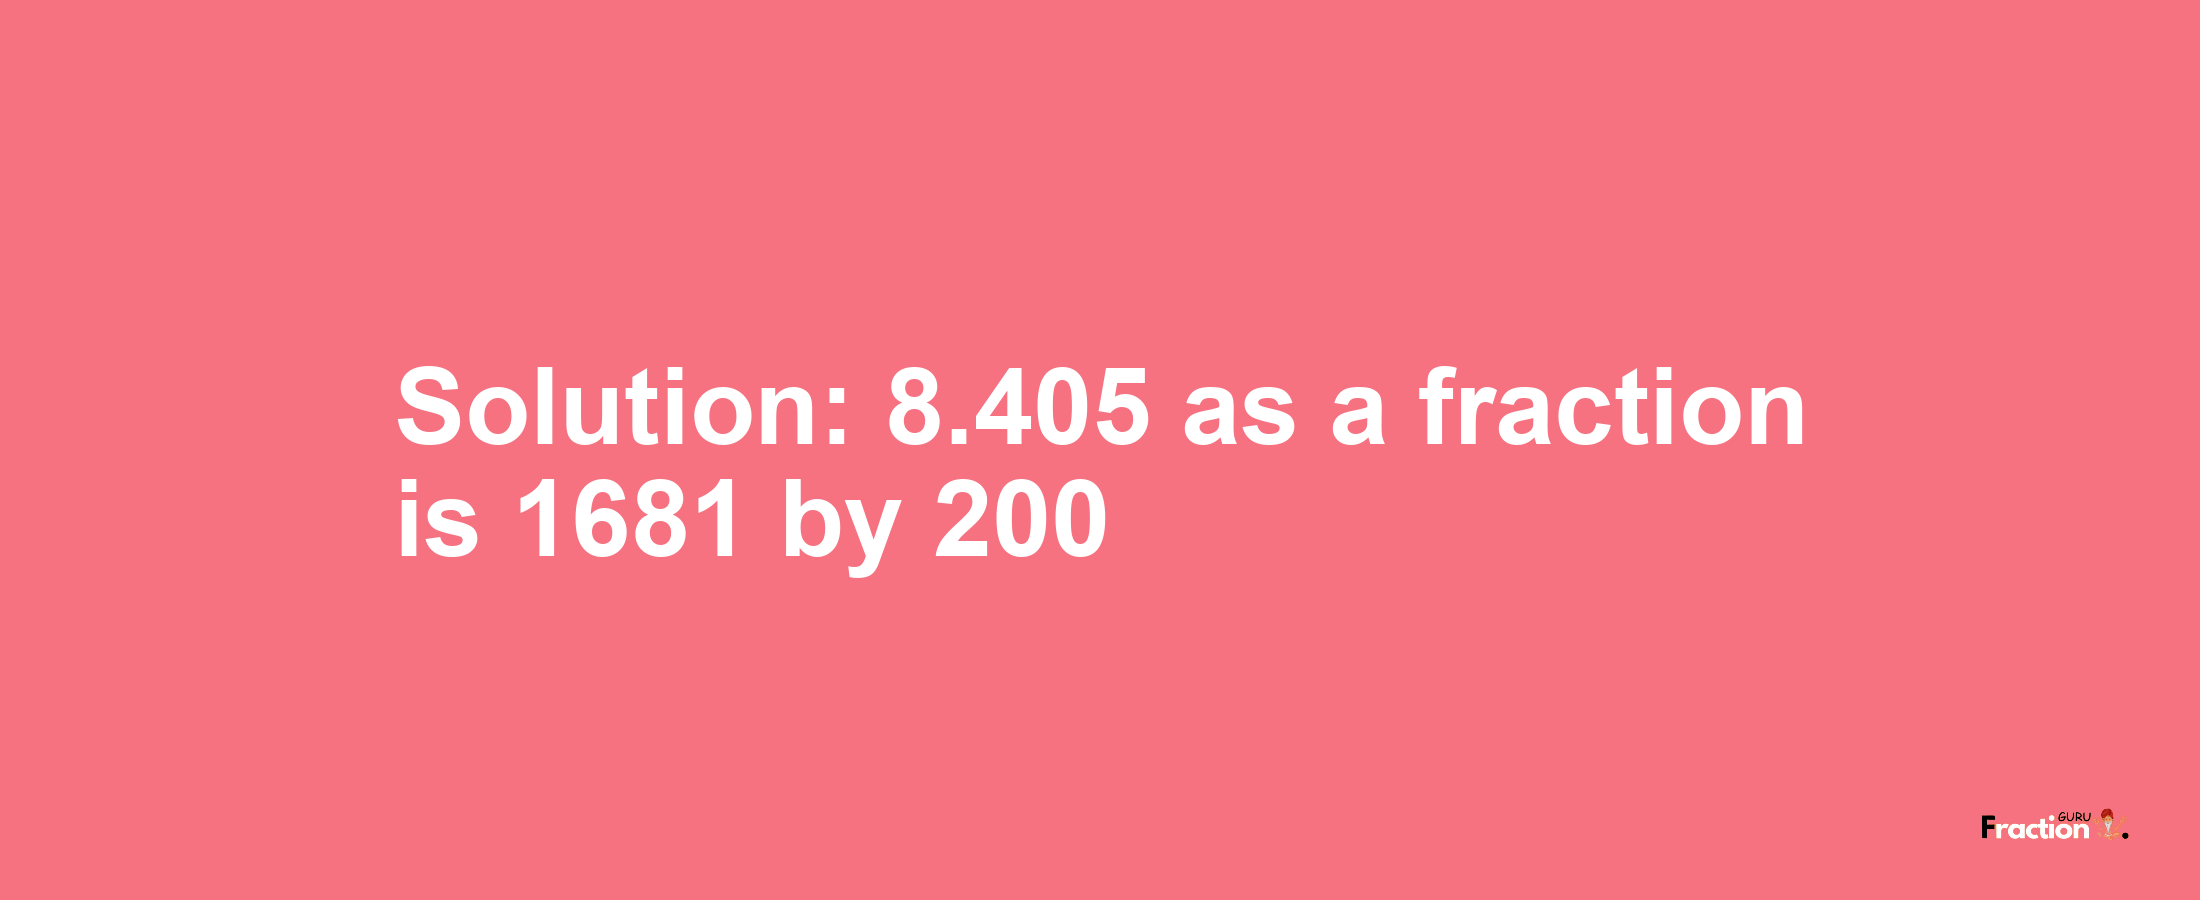 Solution:8.405 as a fraction is 1681/200